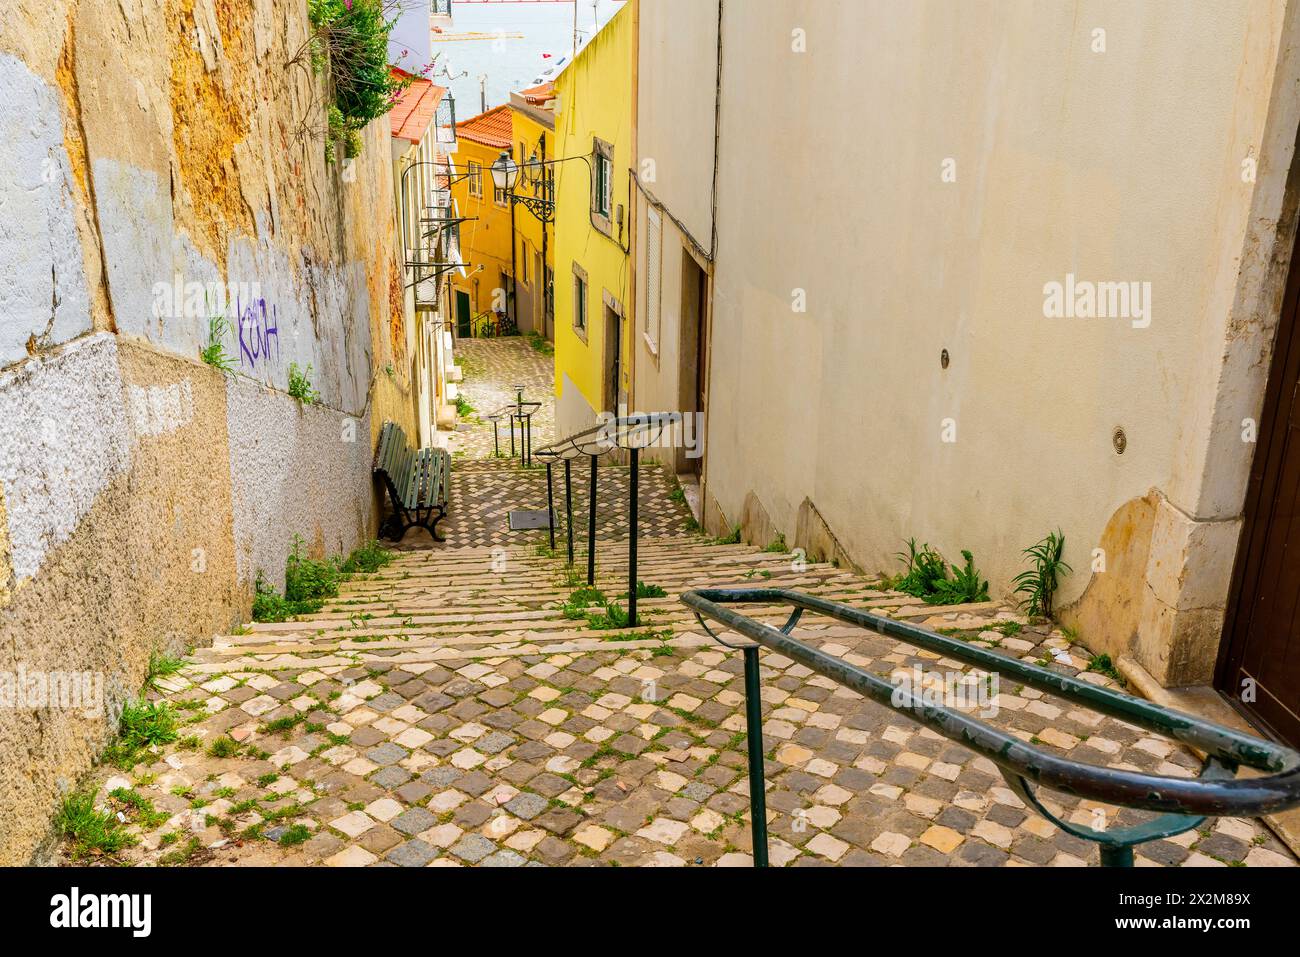 Picruresque streets of Alfama district of Lisbon Old Town. Portugal. Stock Photo